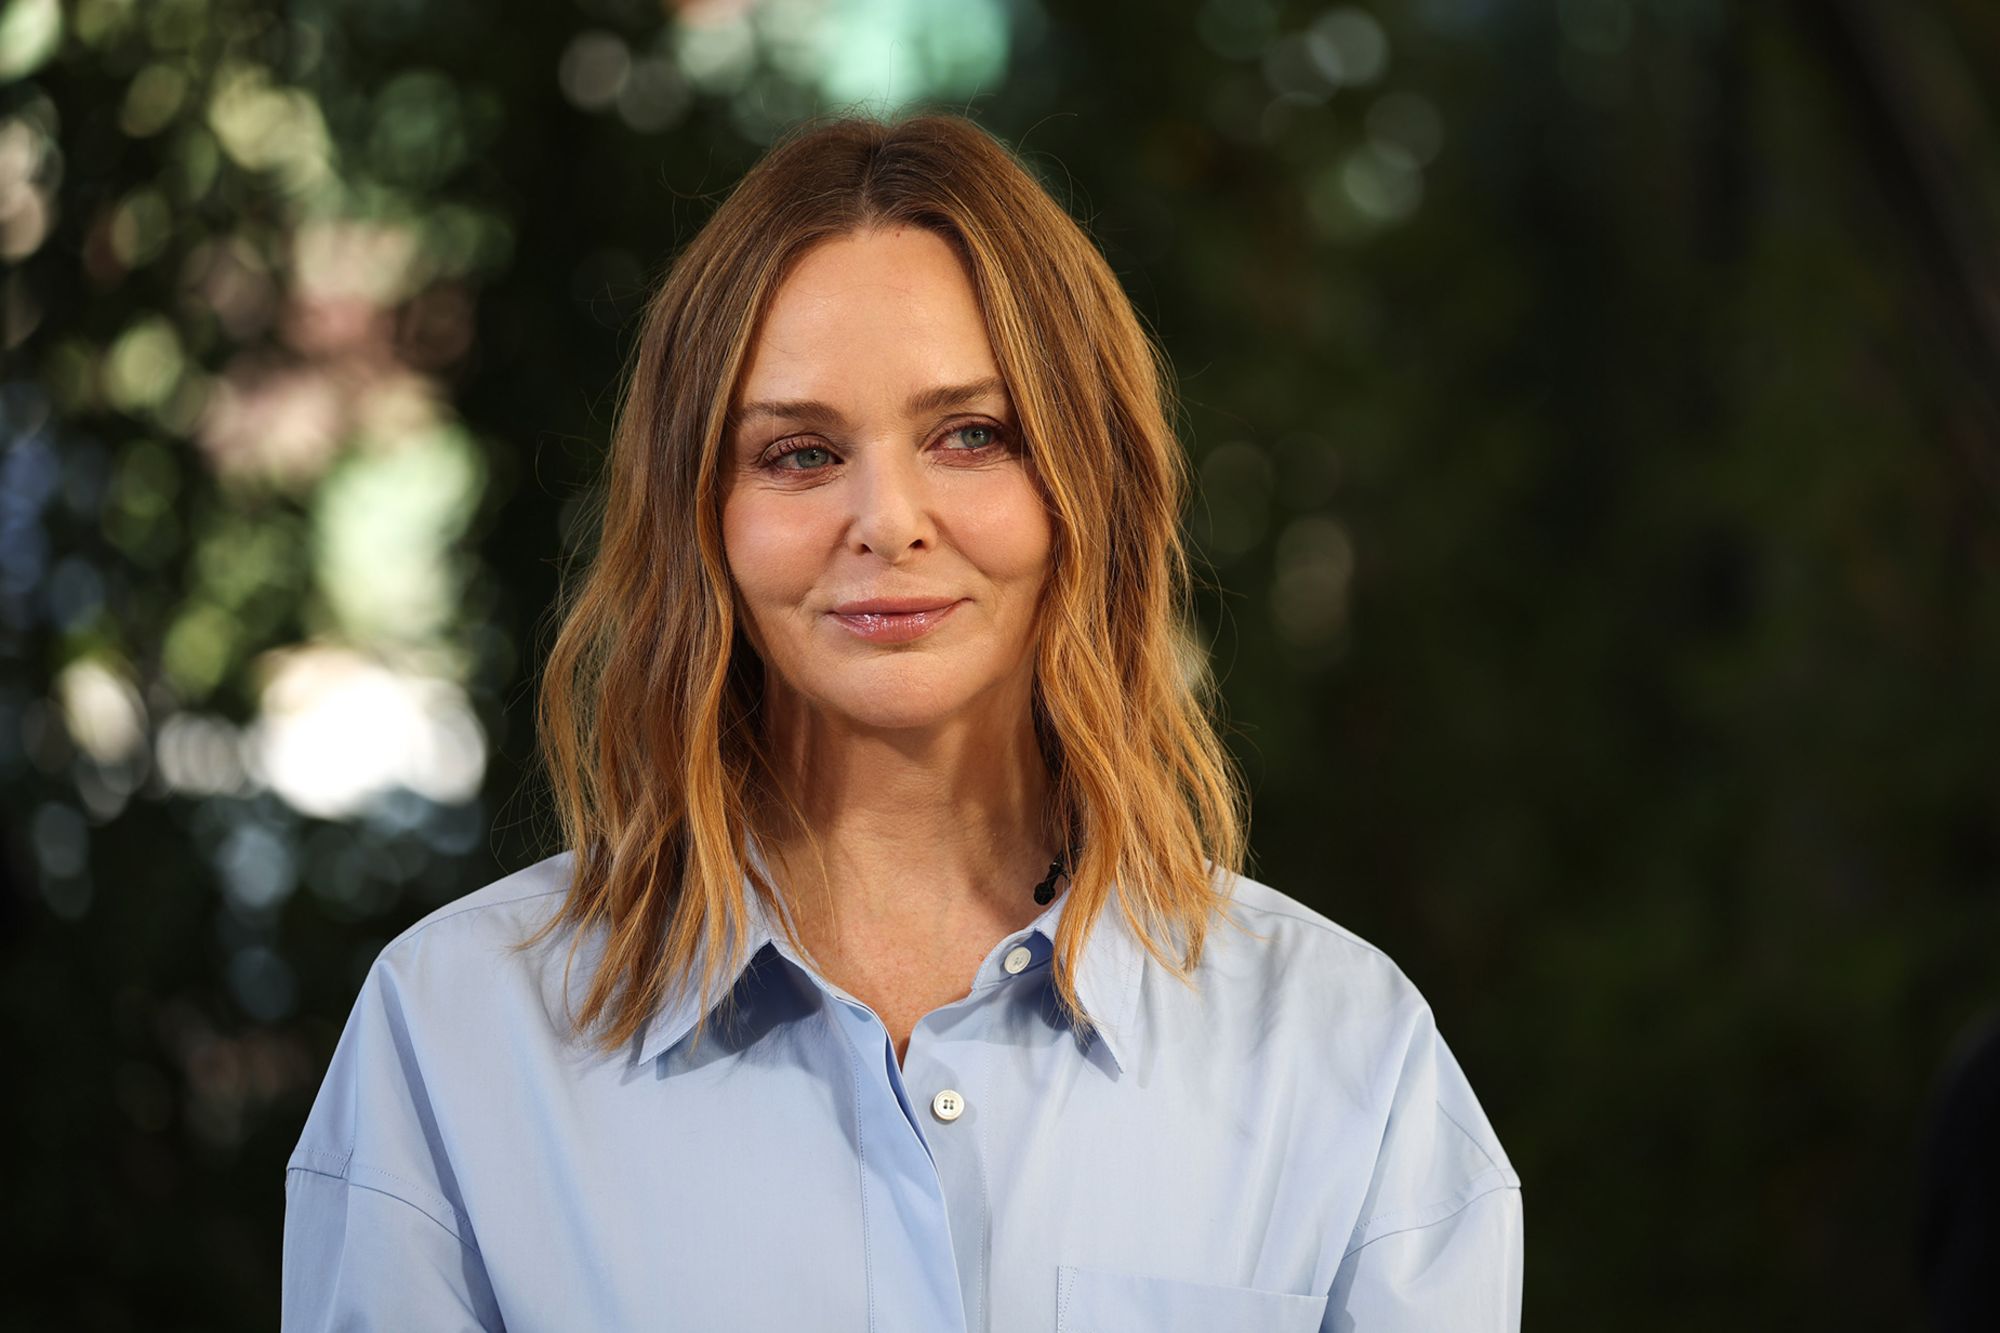 Fashion designer Stella McCartney attended the UN COP28 climate conference at Expo City in Dubai, United Arab Emirates. More than 70,000 politicians, diplomats, campaigners, financiers and business leaders are in Dubai to talk about how to halt the world's slide towards environmental catastrophe.